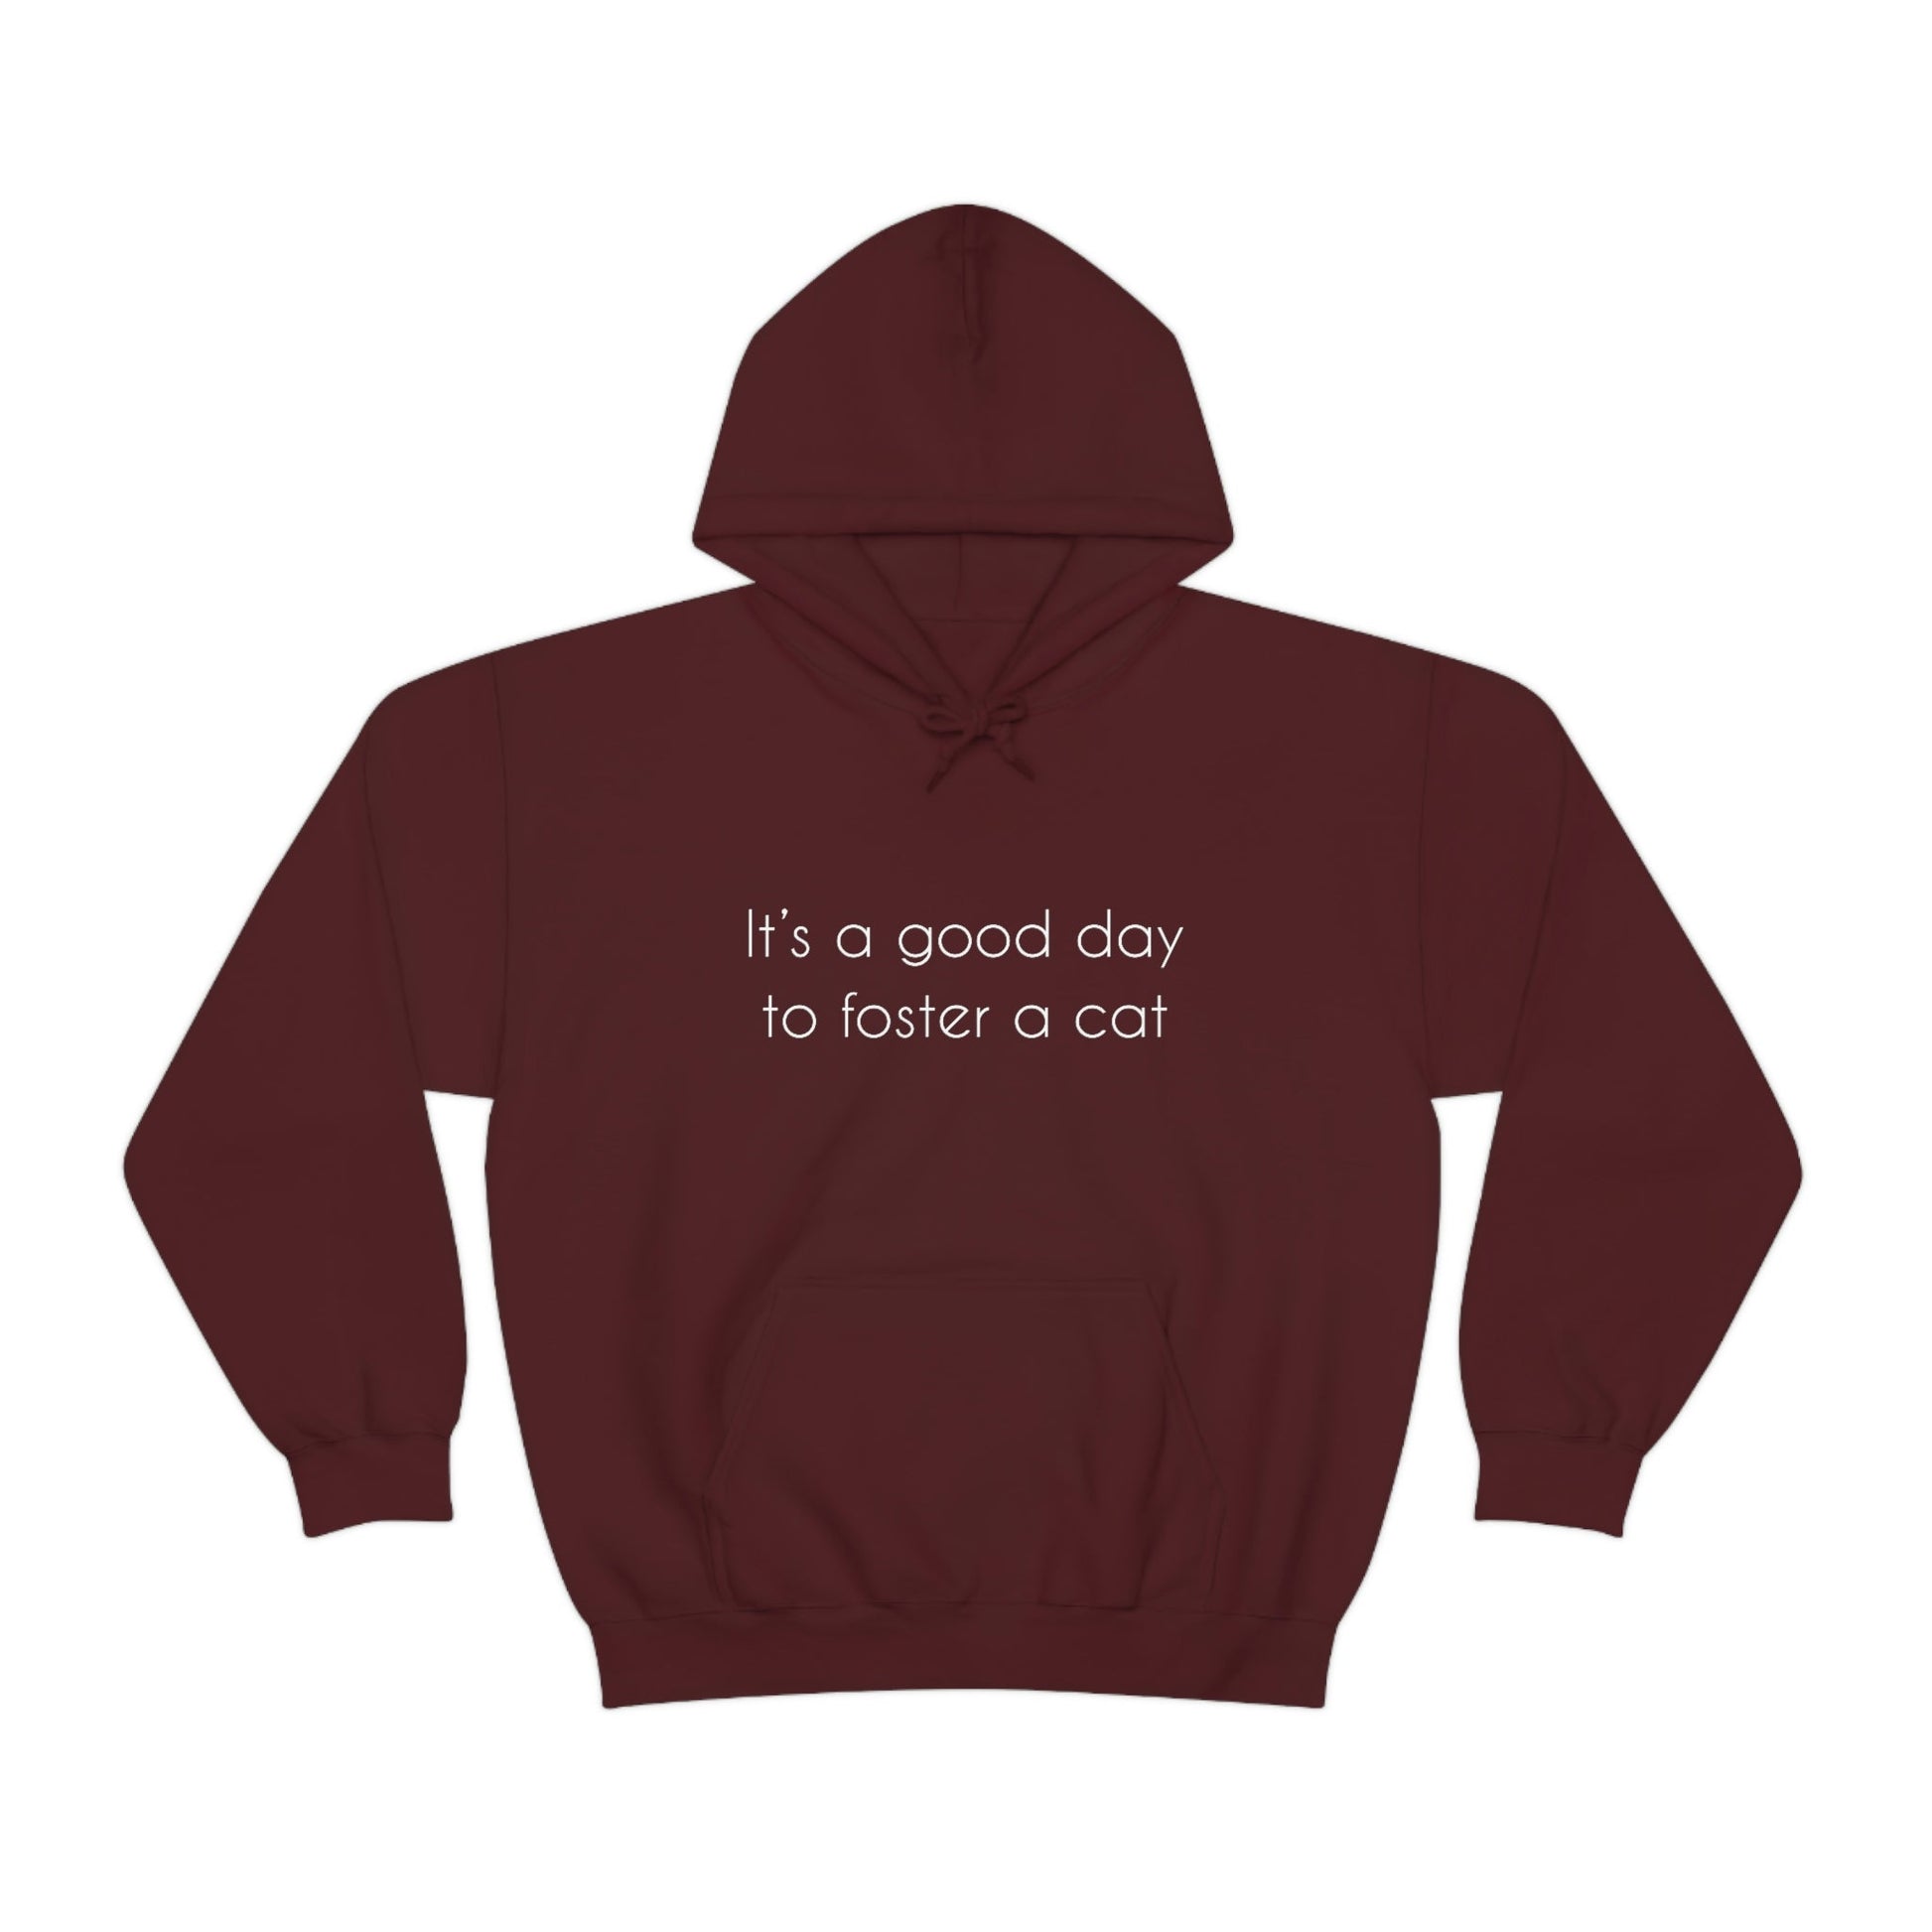 It's A Good Day To Foster A Cat | Hooded Sweatshirt - Detezi Designs-22301581913386453851